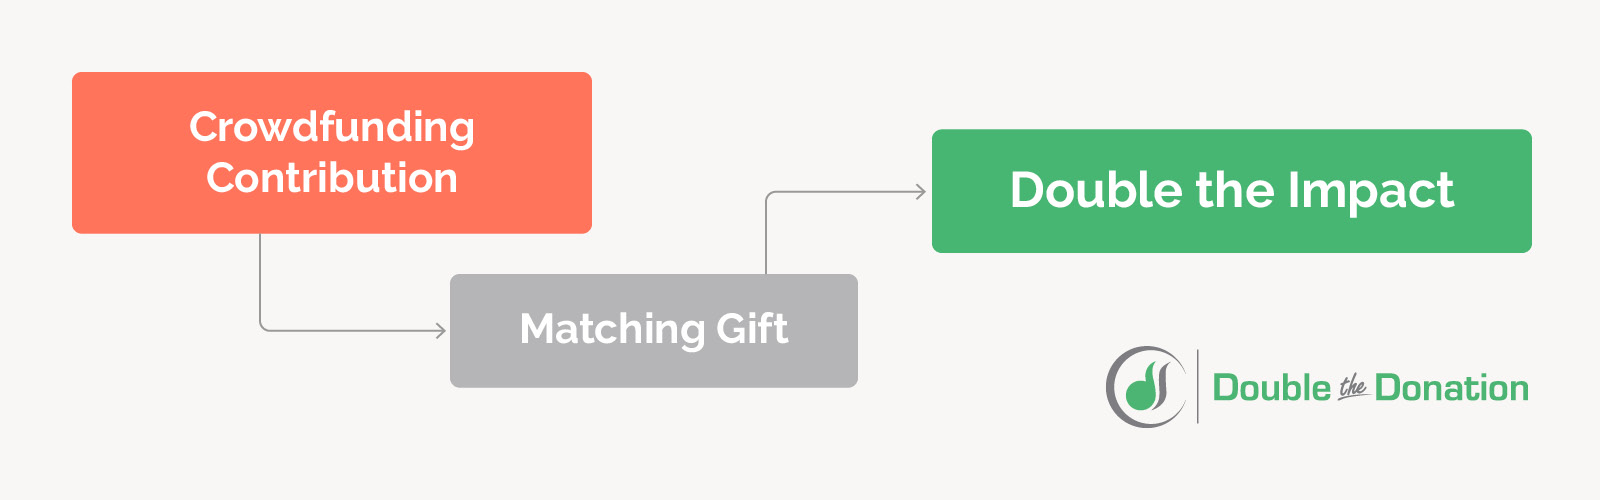 Benefits of matching gifts while crowdfunding for nonprofits